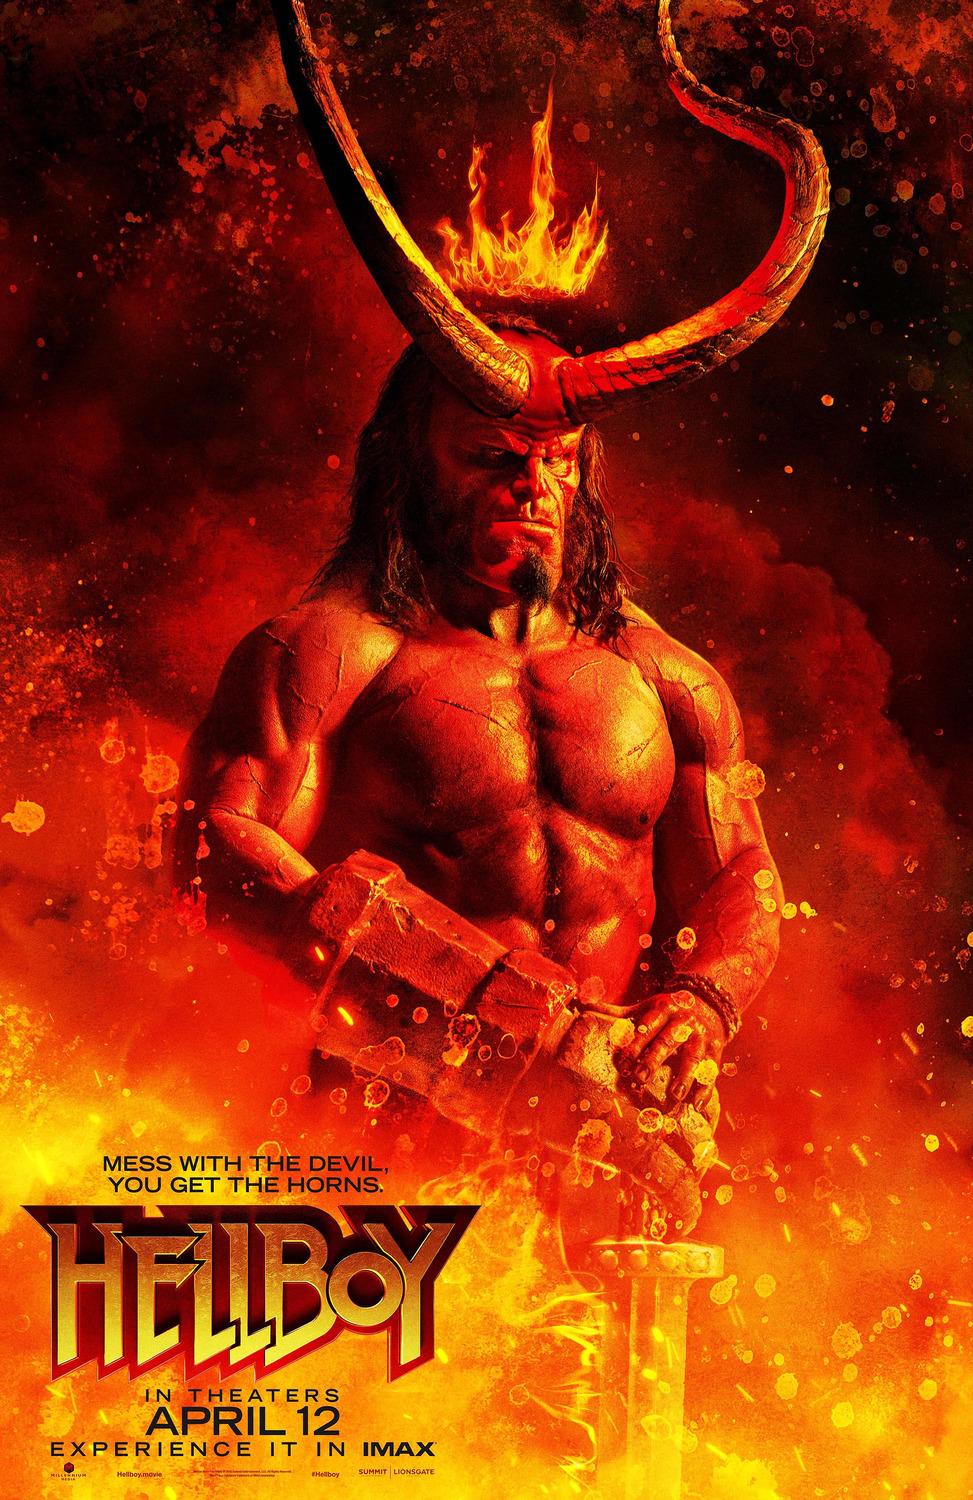 Hellboy Call of Darkness Trailer & Poster 1